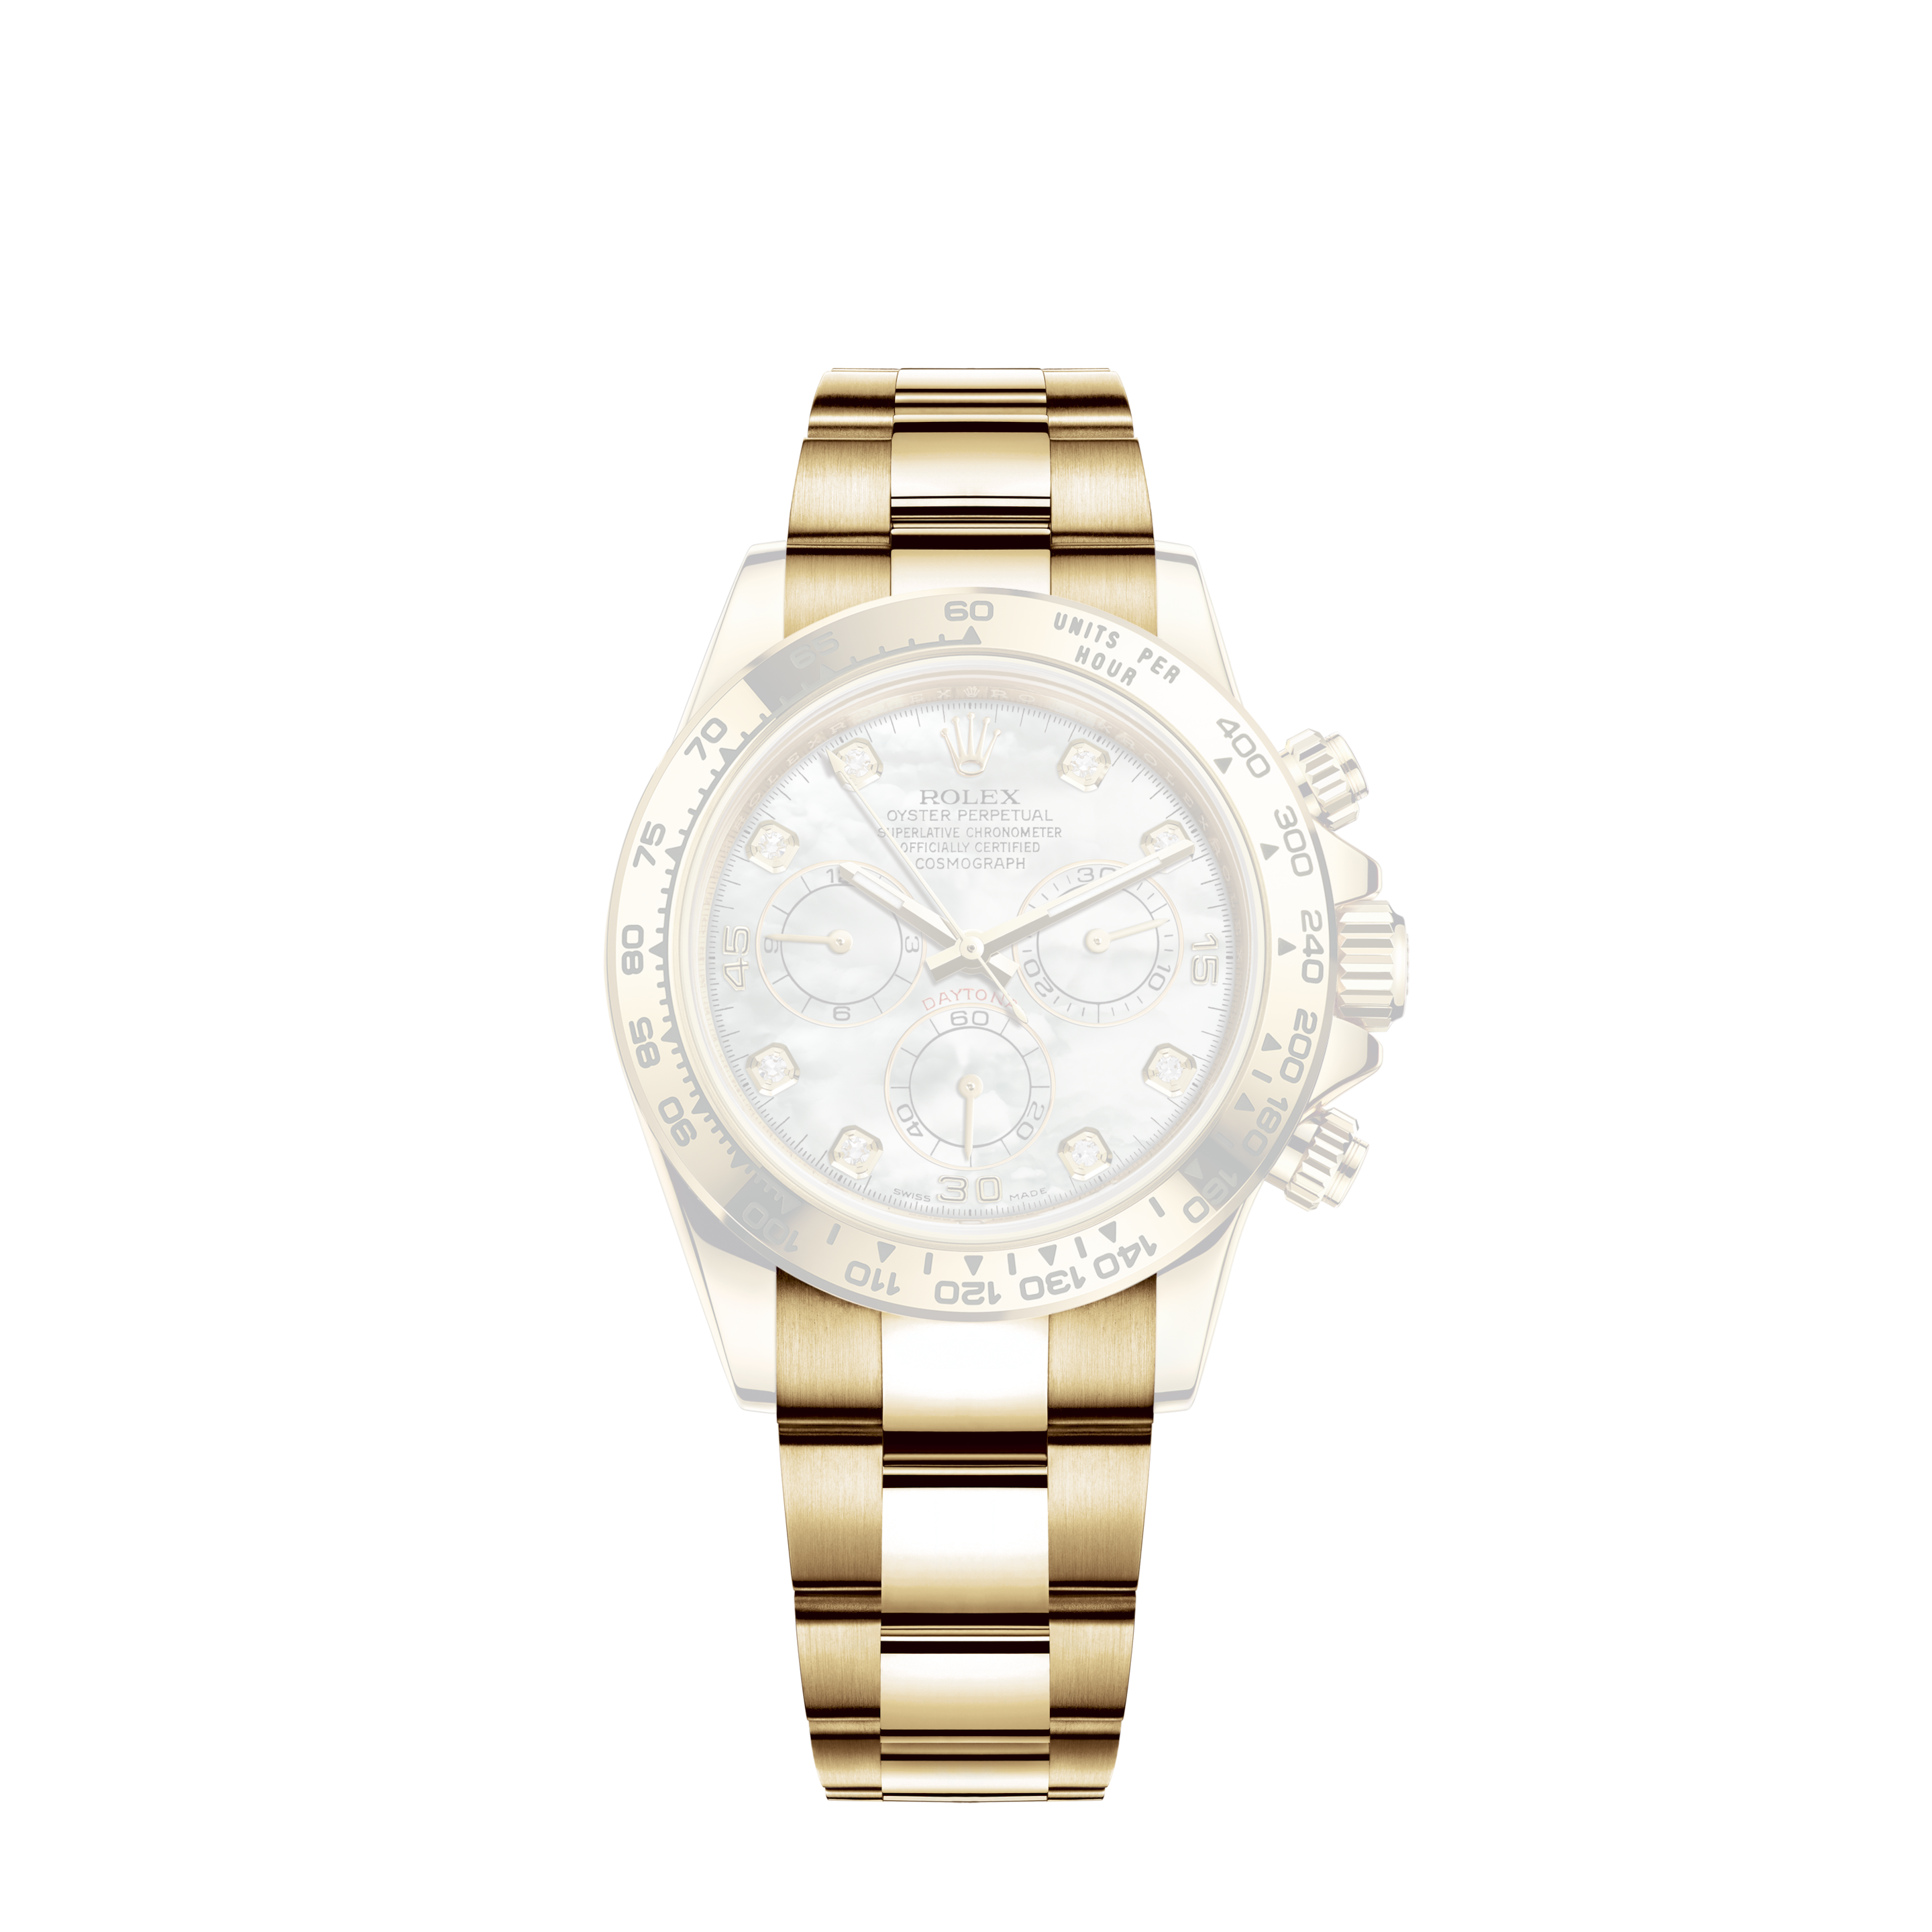 Rolex Diamond Datejust 36mm Two-Tone Gold Blue Custom Dial BezelRolex Diamond Datejust 36mm Two-Tone Gold White Pearl Custom Dial